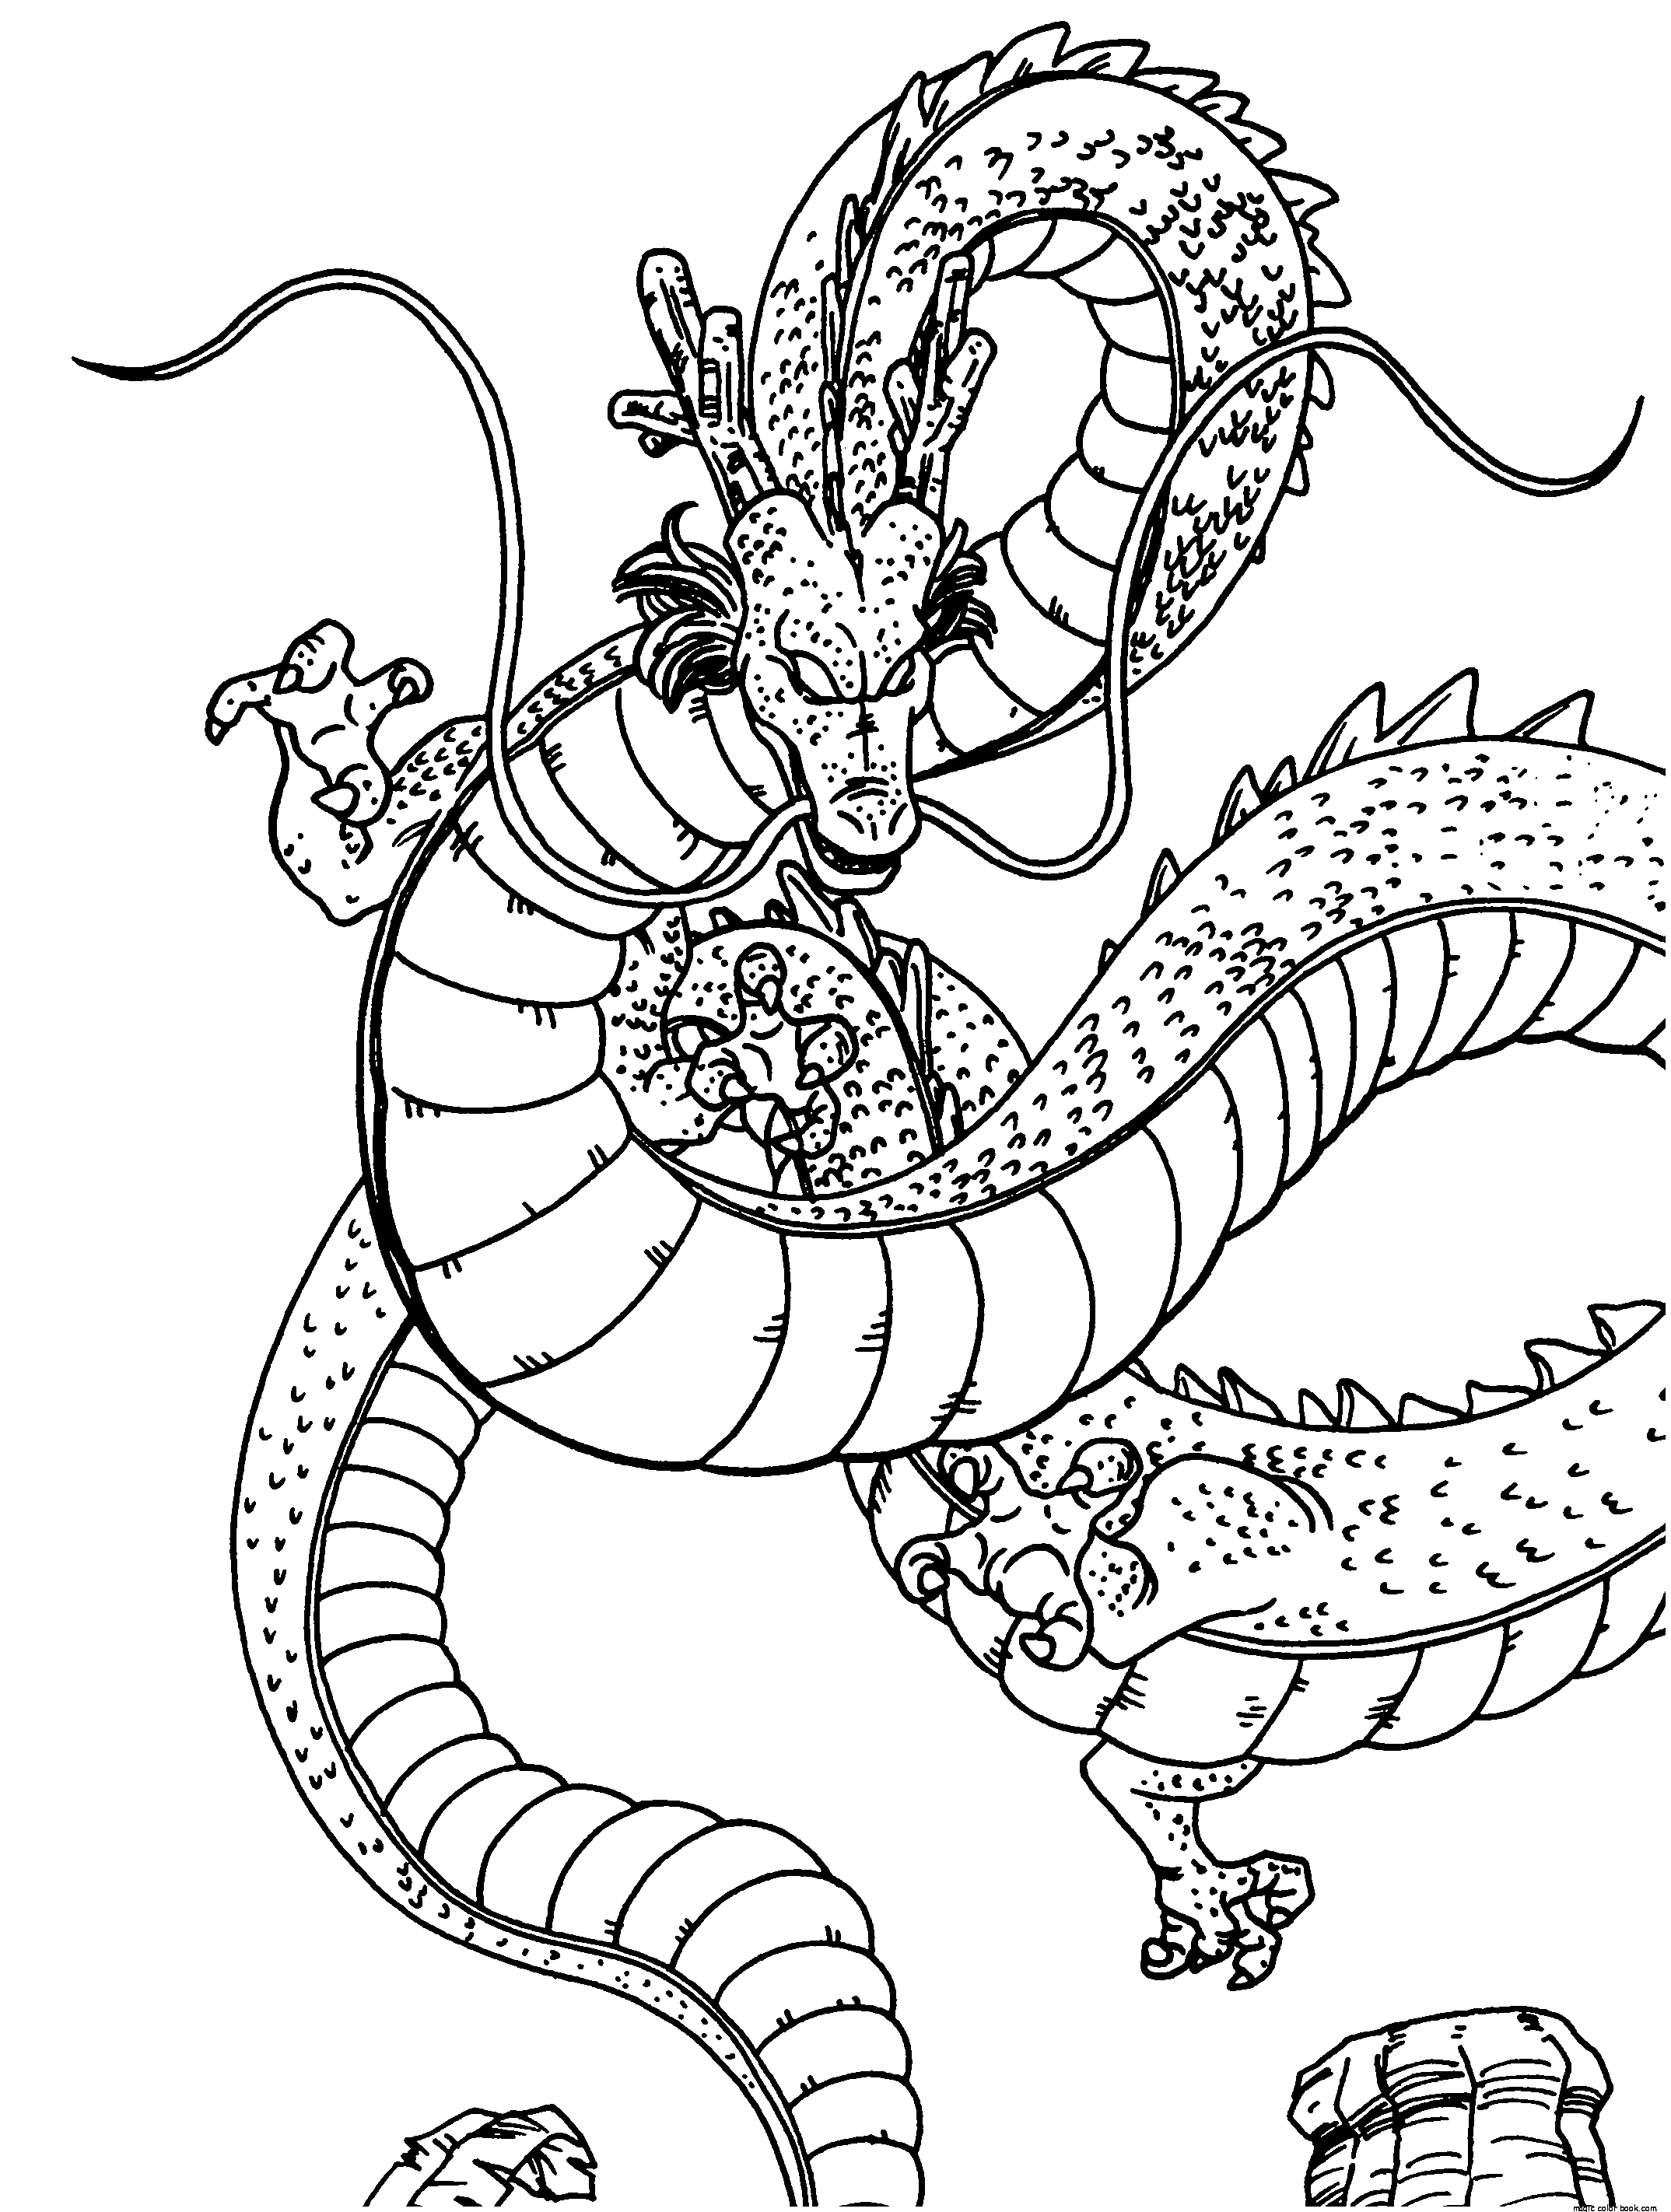 Dragon ball z dragon coloring pages online free